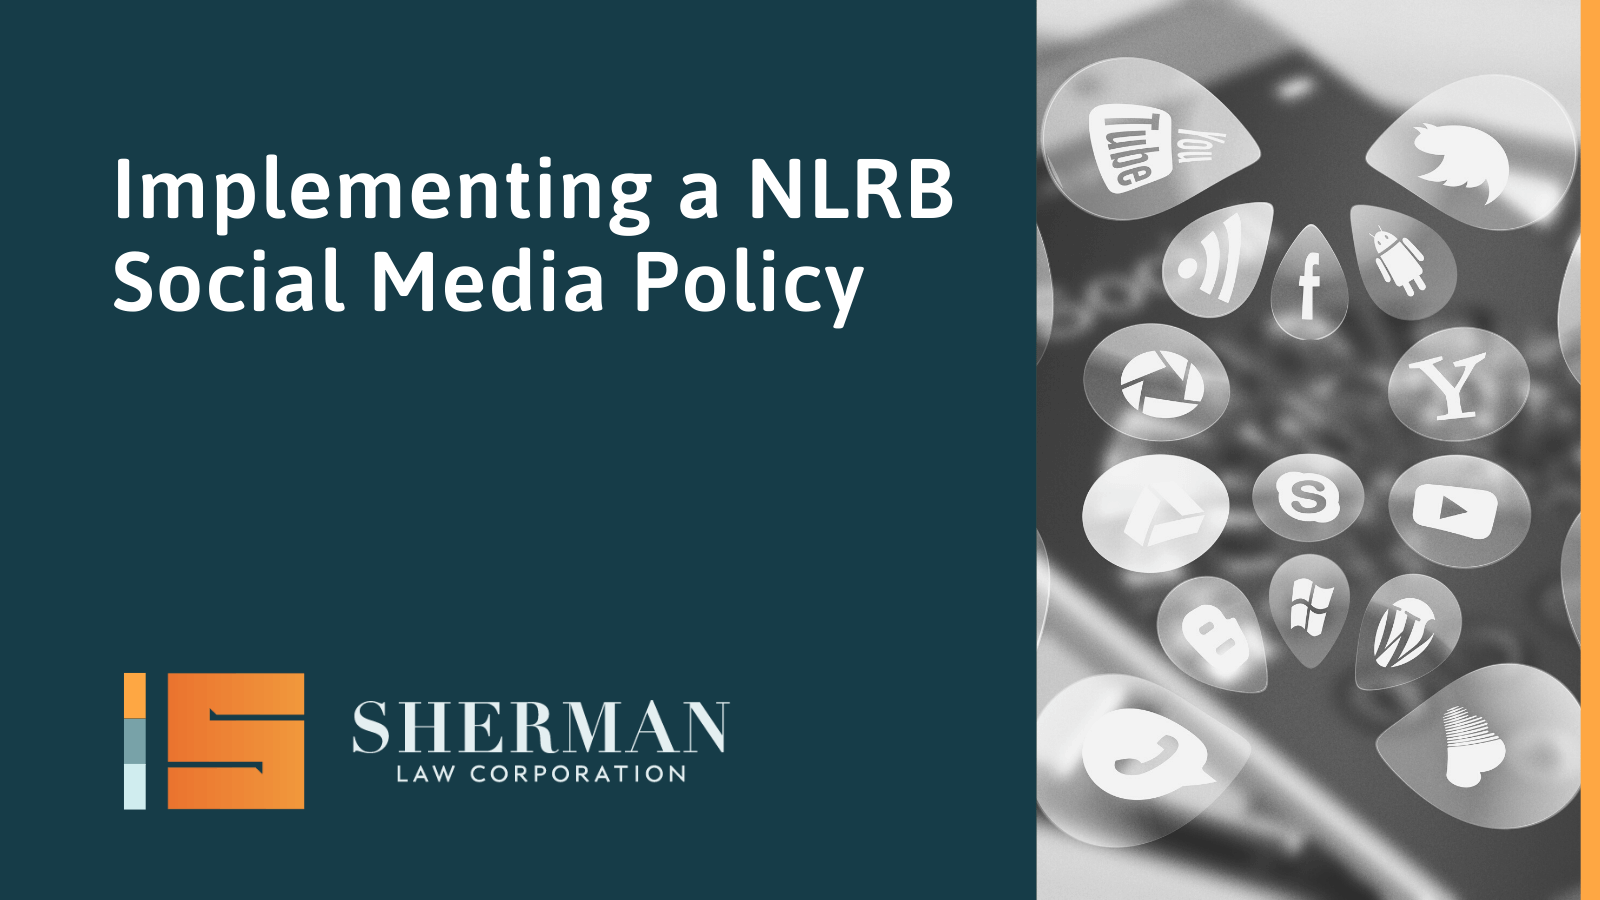 Implementing a NLRB Social Media Policy- sherman law corporation